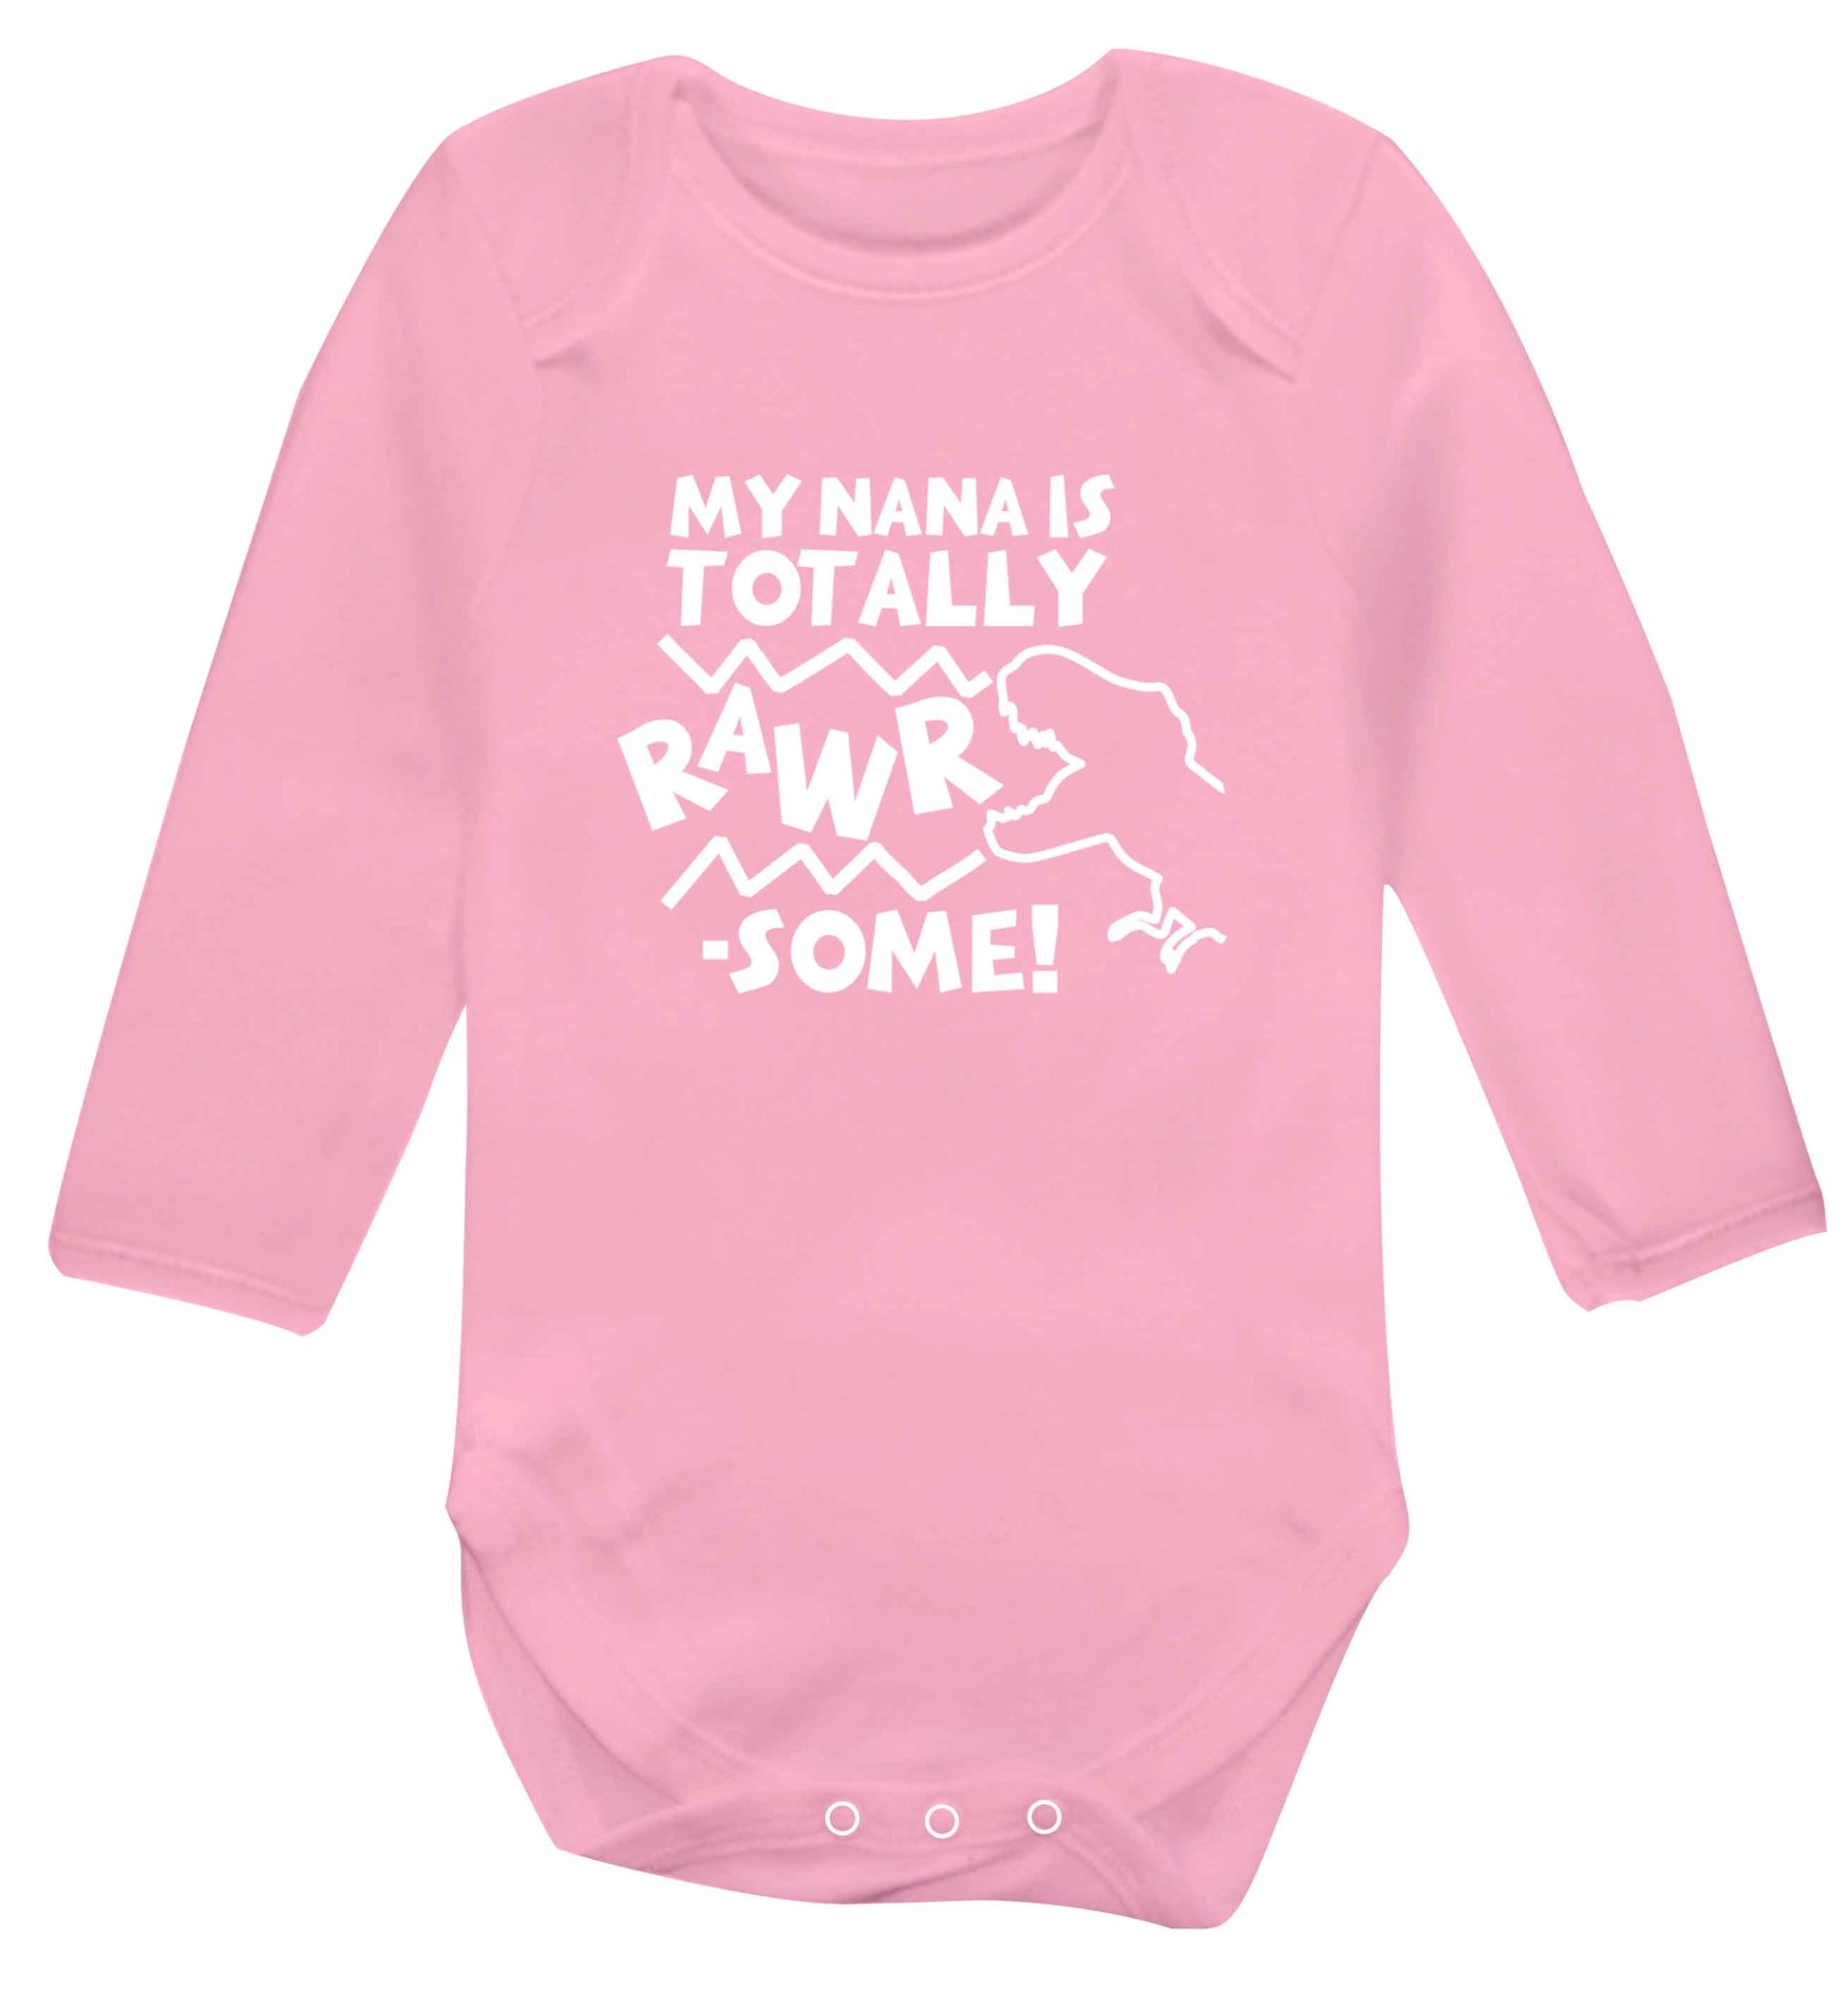 My nana is totally rawrsome baby vest long sleeved pale pink 6-12 months